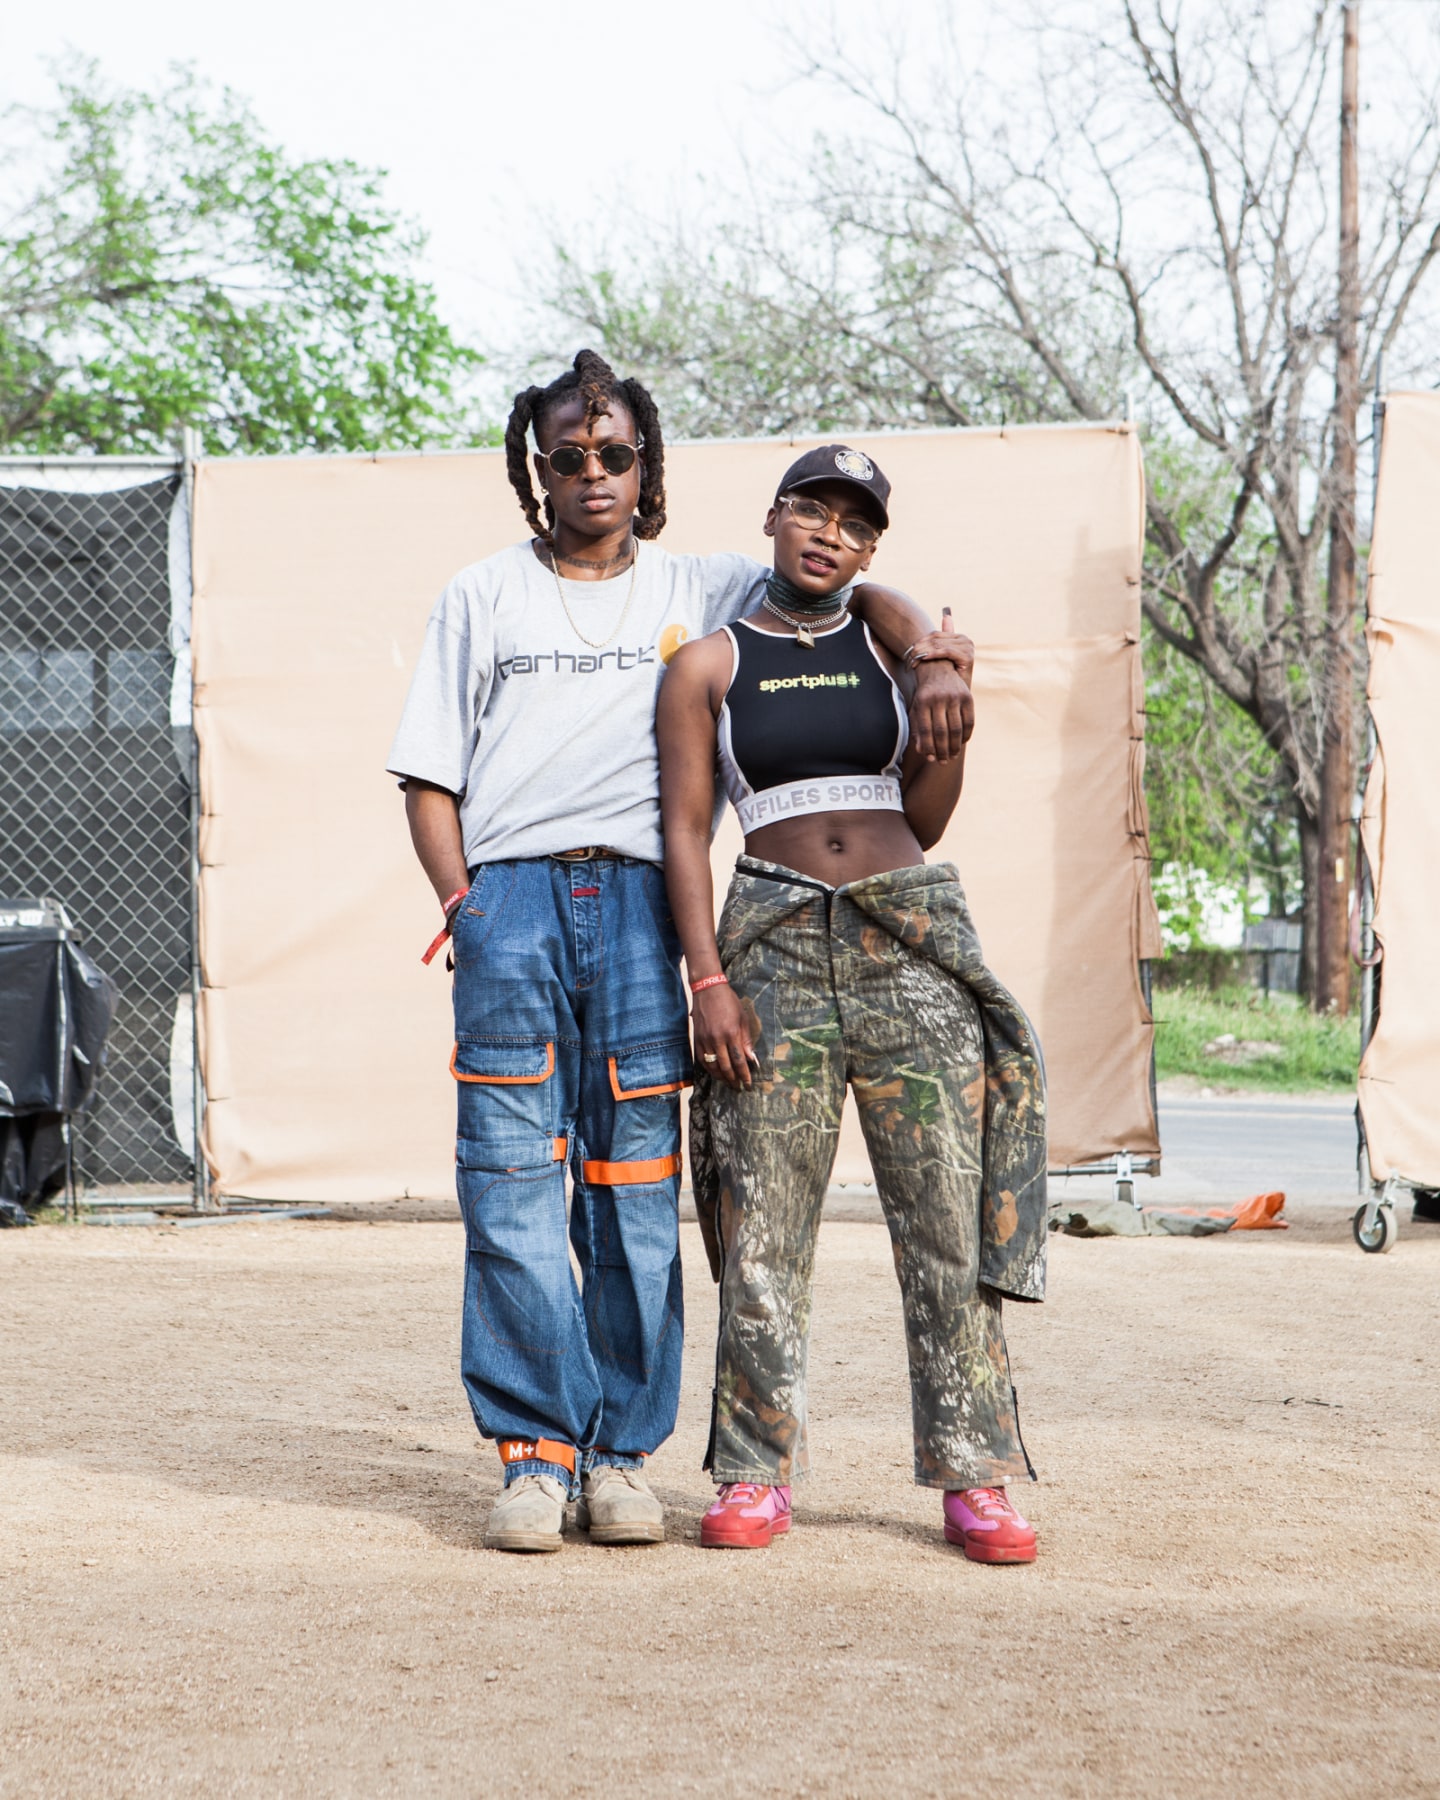 41 Looks From SXSW That Are Perfect For Spring